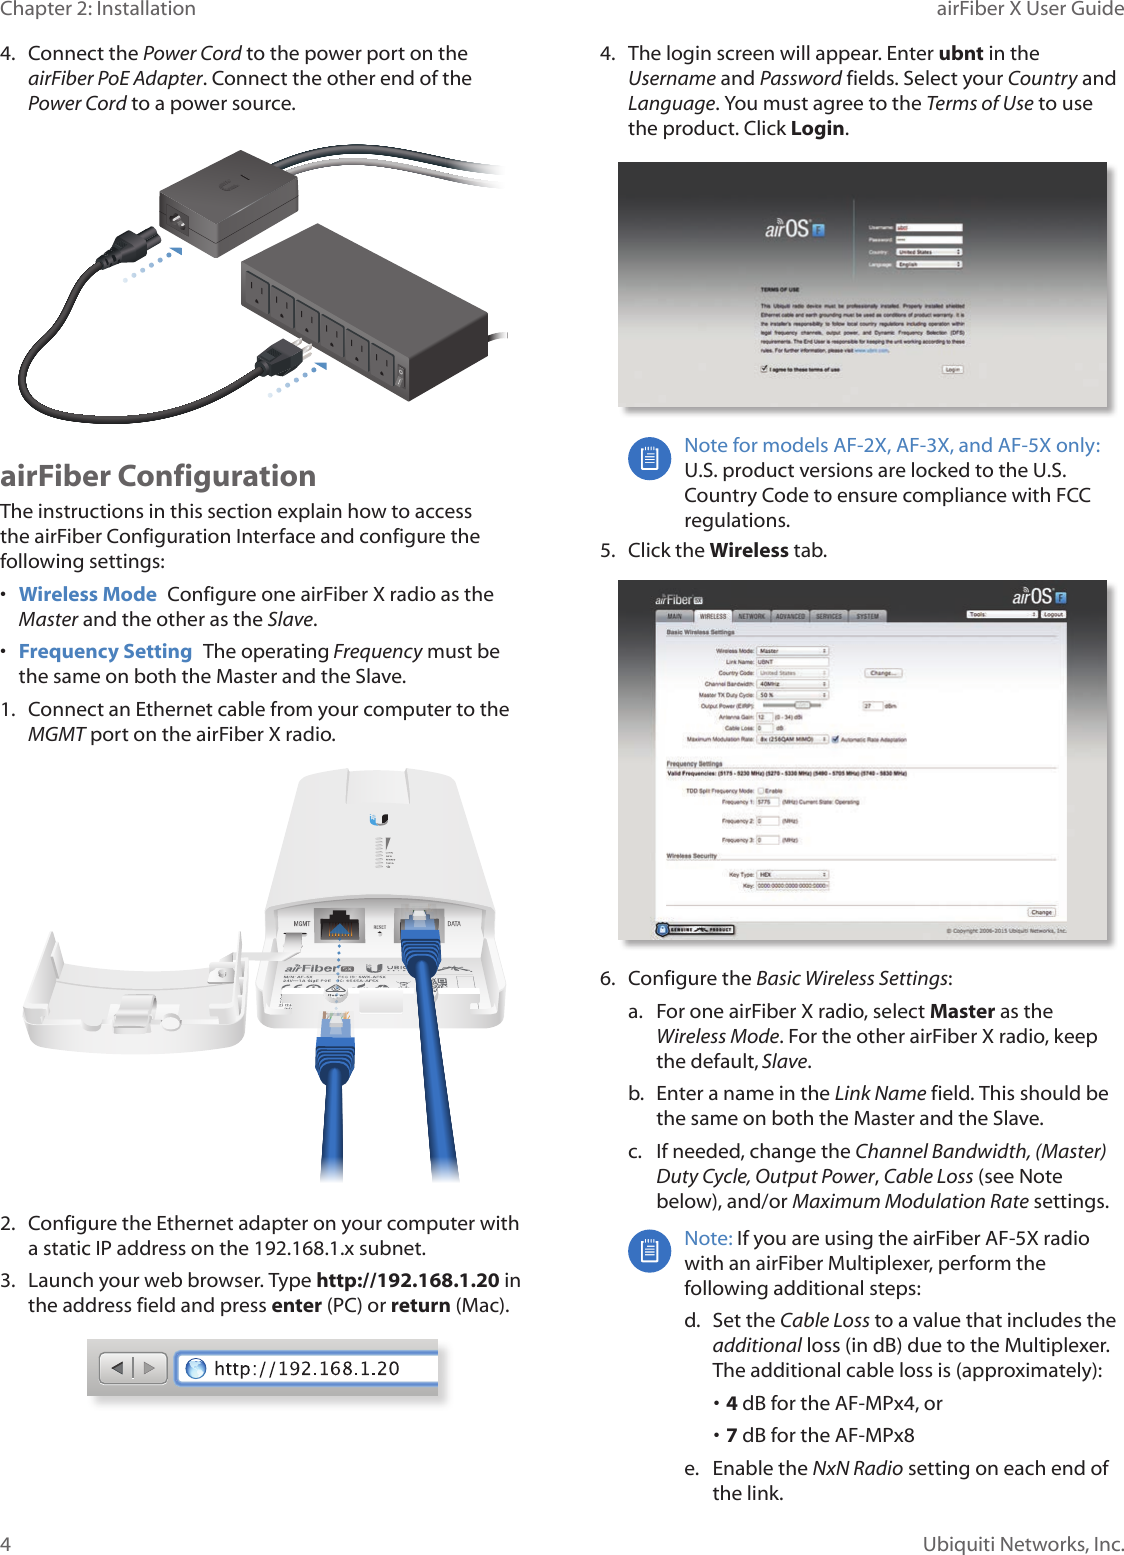 4Chapter 2: Installation airFiber X User GuideUbiquiti Networks, Inc.4.  Connect the Power Cord to the power port on the airFiber PoE Adapter. Connect the other end of the Power Cord to a powersource.airFiber ConfigurationThe instructions in this section explain how to access the airFiber Configuration Interface and configure the following settings: •  Wireless Mode  Configure one airFiberX radio as the Master and the other as the Slave.•  Frequency Setting  The operating Frequency must be the same on both the Master and the Slave.1.  Connect an Ethernet cable from your computer to the MGMT port on the airFiberX radio.2.  Configure the Ethernet adapter on your computer with a static IP address on the 192.168.1.x subnet.3.  Launch your web browser. Type http://192.168.1.20 in the address field and press enter (PC) or return (Mac). 4.  The login screen will appear. Enter ubnt in the Username and Password fields. Select your Country and Language. You must agree to the Terms of Use to use the product. Click Login.Note for models AF-2X, AF-3X, and AF-5X only: U.S. product versions are locked to the U.S. Country Code to ensure compliance with FCC regulations. 5.  Click the Wireless tab.6.  Configure the Basic Wireless Settings:a.  For one airFiberX radio, select Master as the Wireless Mode. For the other airFiberX radio, keep the default,Slave.b.  Enter a name in the Link Name field. This should be the same on both the Master and the Slave.c.  If needed, change the Channel Bandwidth, (Master) Duty Cycle, Output Power, Cable Loss (see Note below), and/or Maximum Modulation Rate settings.Note: If you are using the airFiber AF-5X radio with an airFiber Multiplexer, perform the following additional steps:d.  Set the CableLoss to a value that includes the additional loss (in dB) due to the Multiplexer. The additional cable loss is (approximately):• 4 dB for the AF-MPx4, or• 7 dB for the AF-MPx8e.  Enable the NxN Radio setting on each end of the link.